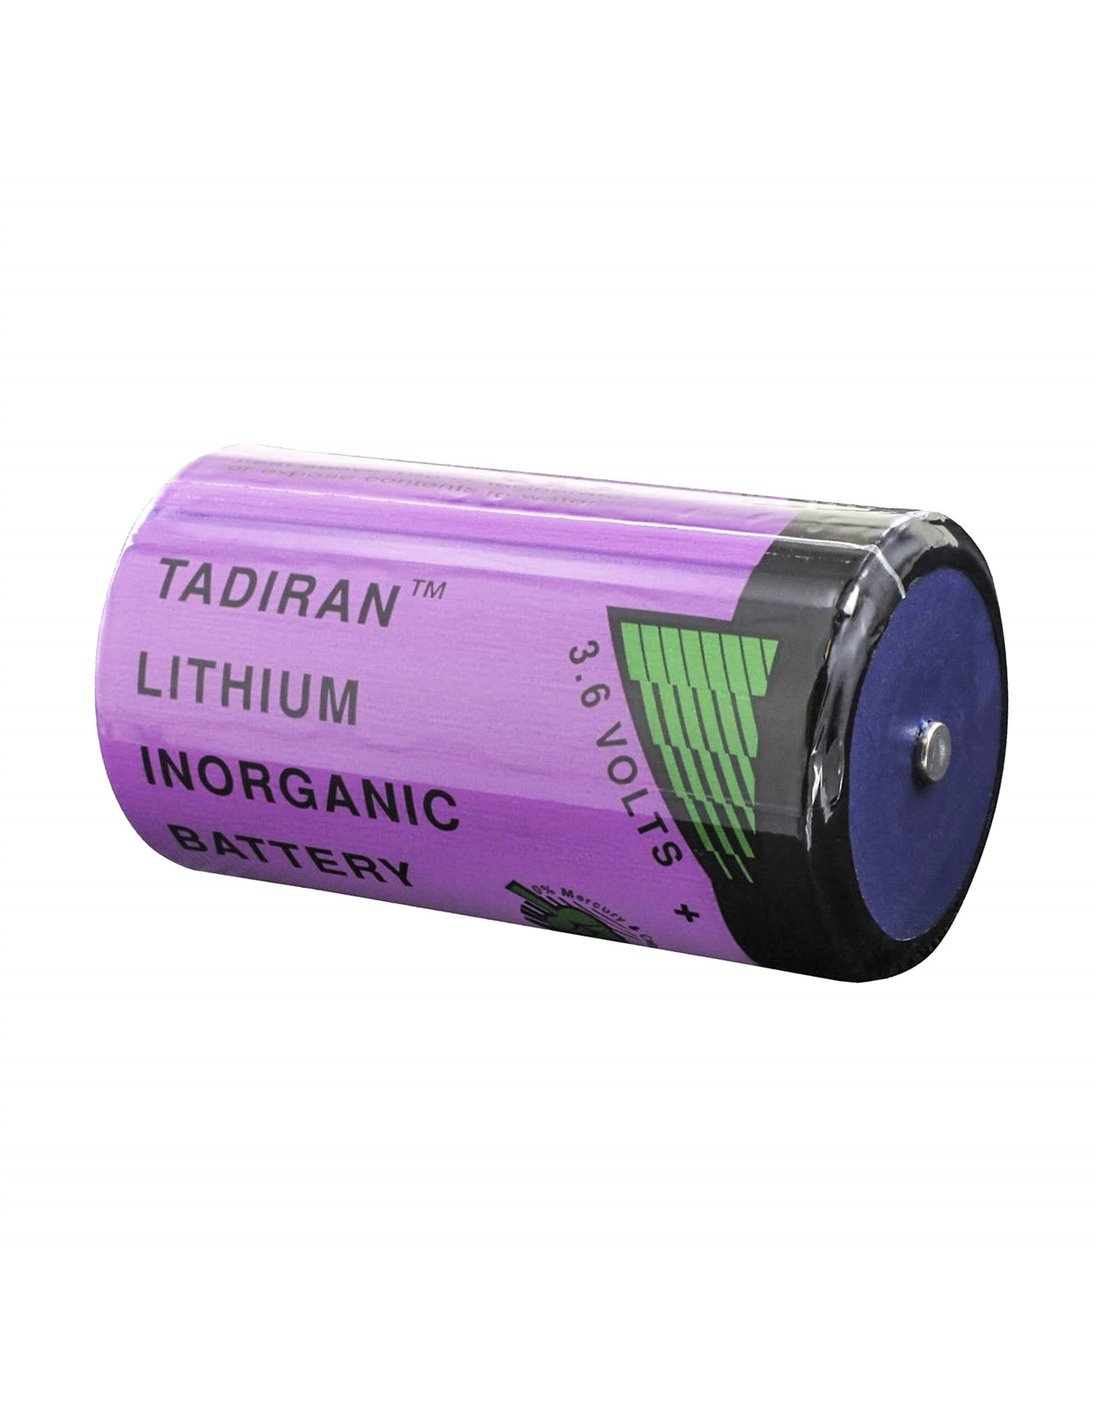 Tadiran TL-4930/S XOL Series 3.6V D Size 19Ah Lithium Battery replaces LSH20 & LS33600 3.6V - Non Rechargeable